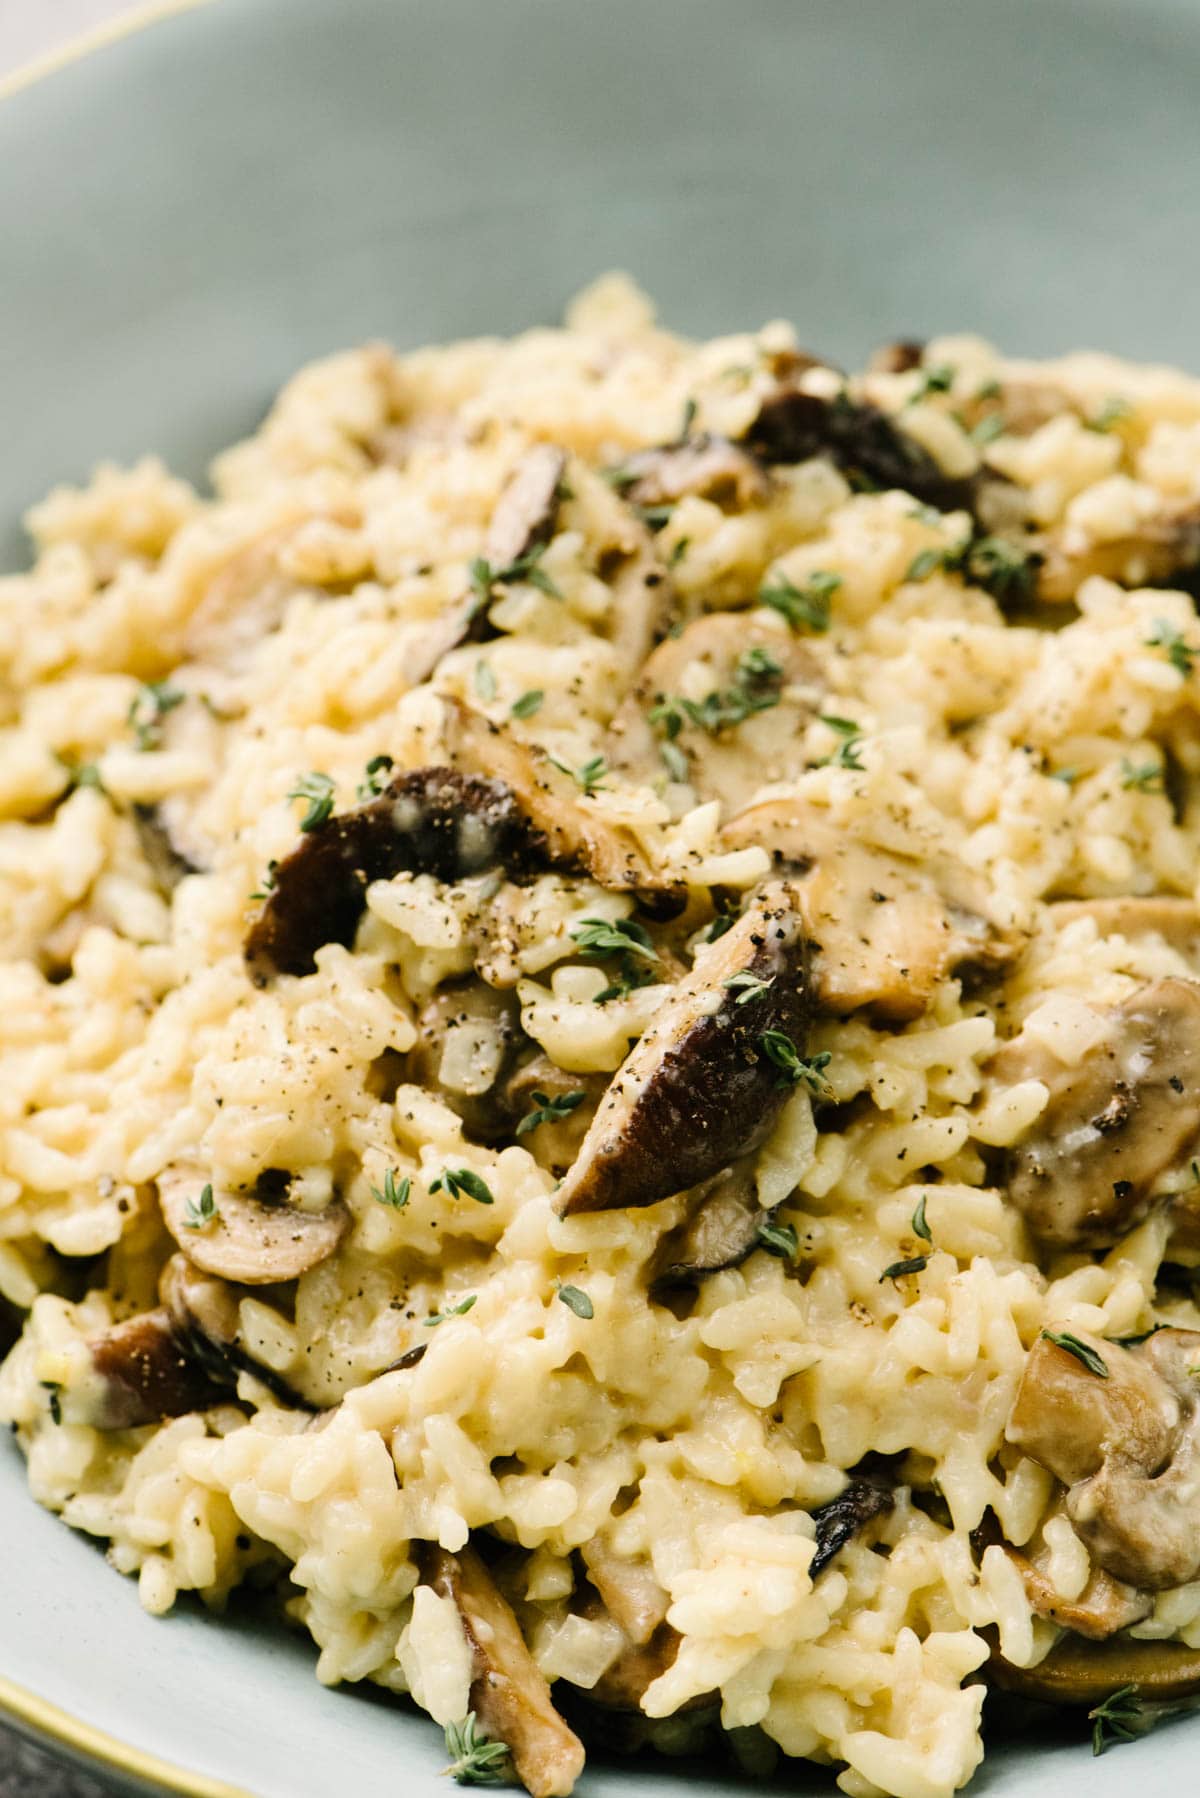 Side view, creamy mushroom risotto in a light blue serving bowl, garnished with fresh thyme leaves.